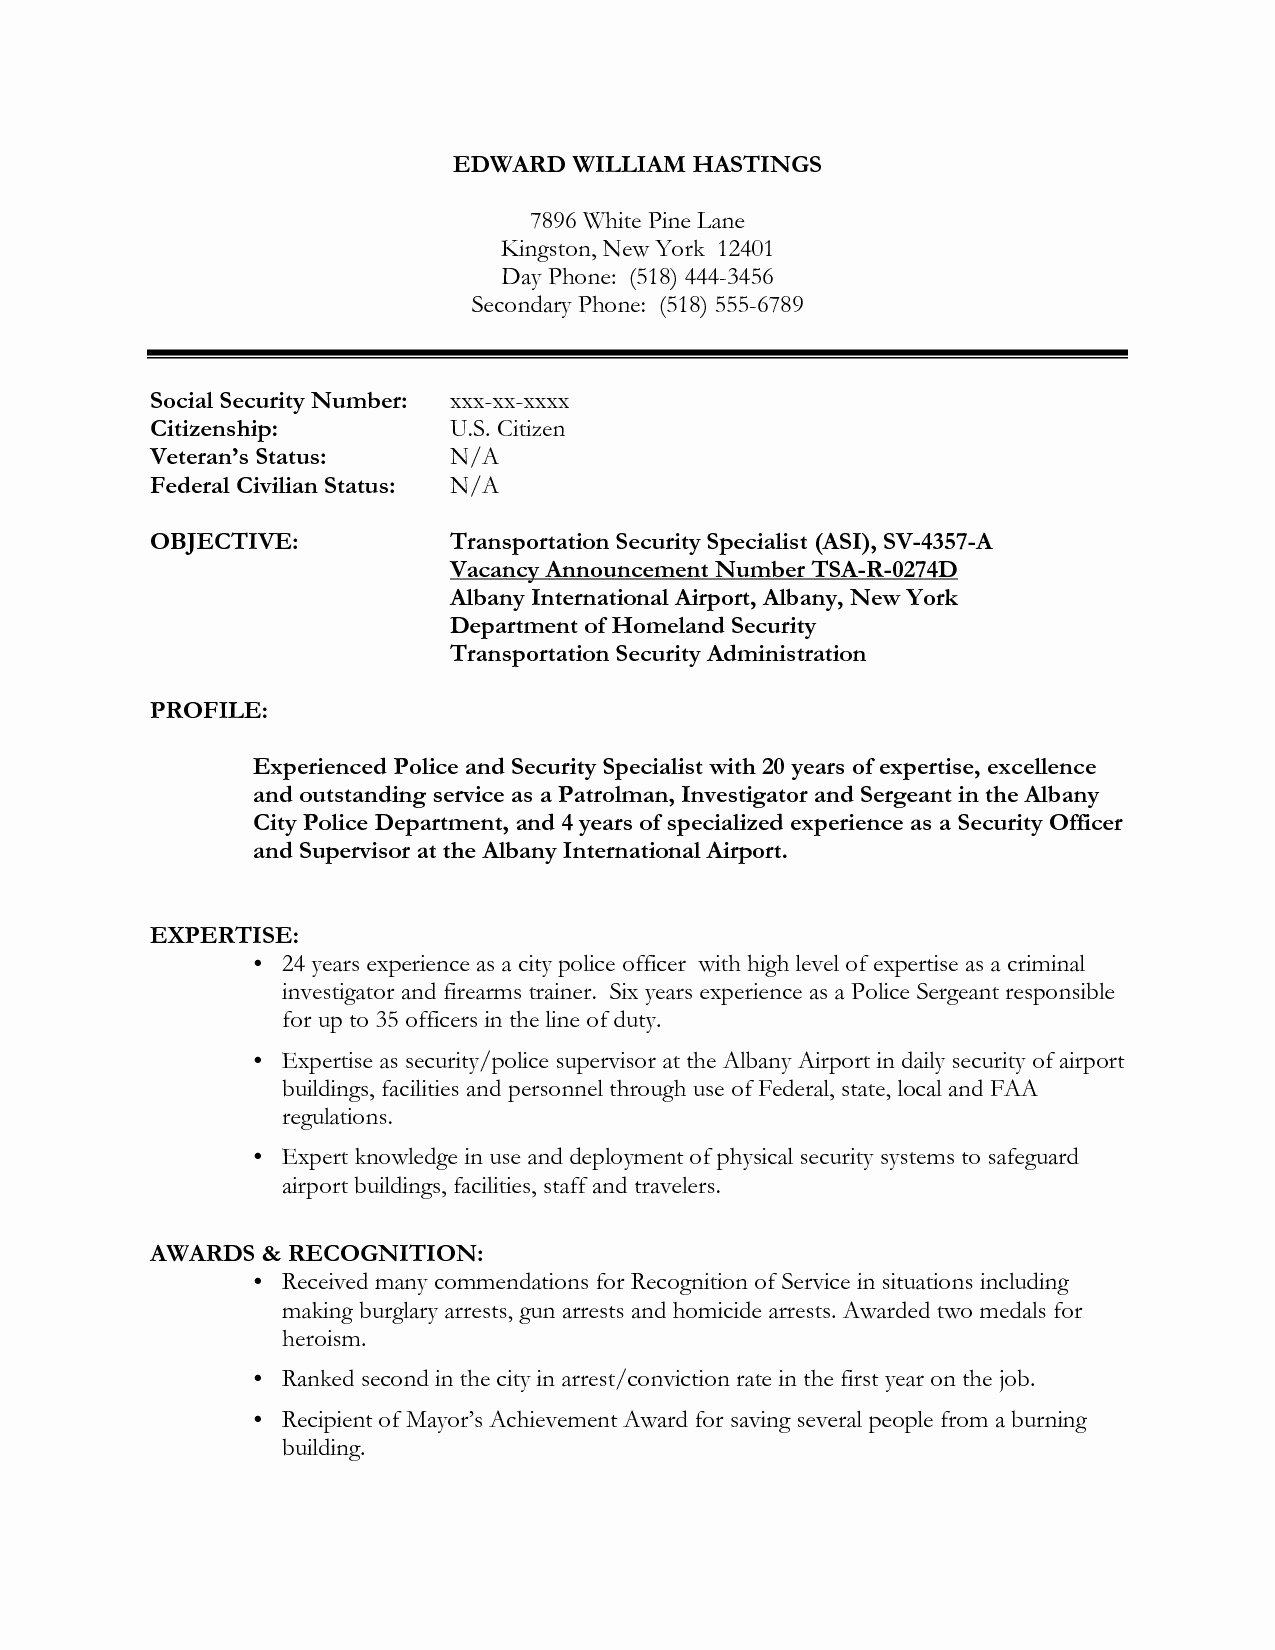 Cover Letter for Security Job New Fresh Transportation Security Ficer Resume